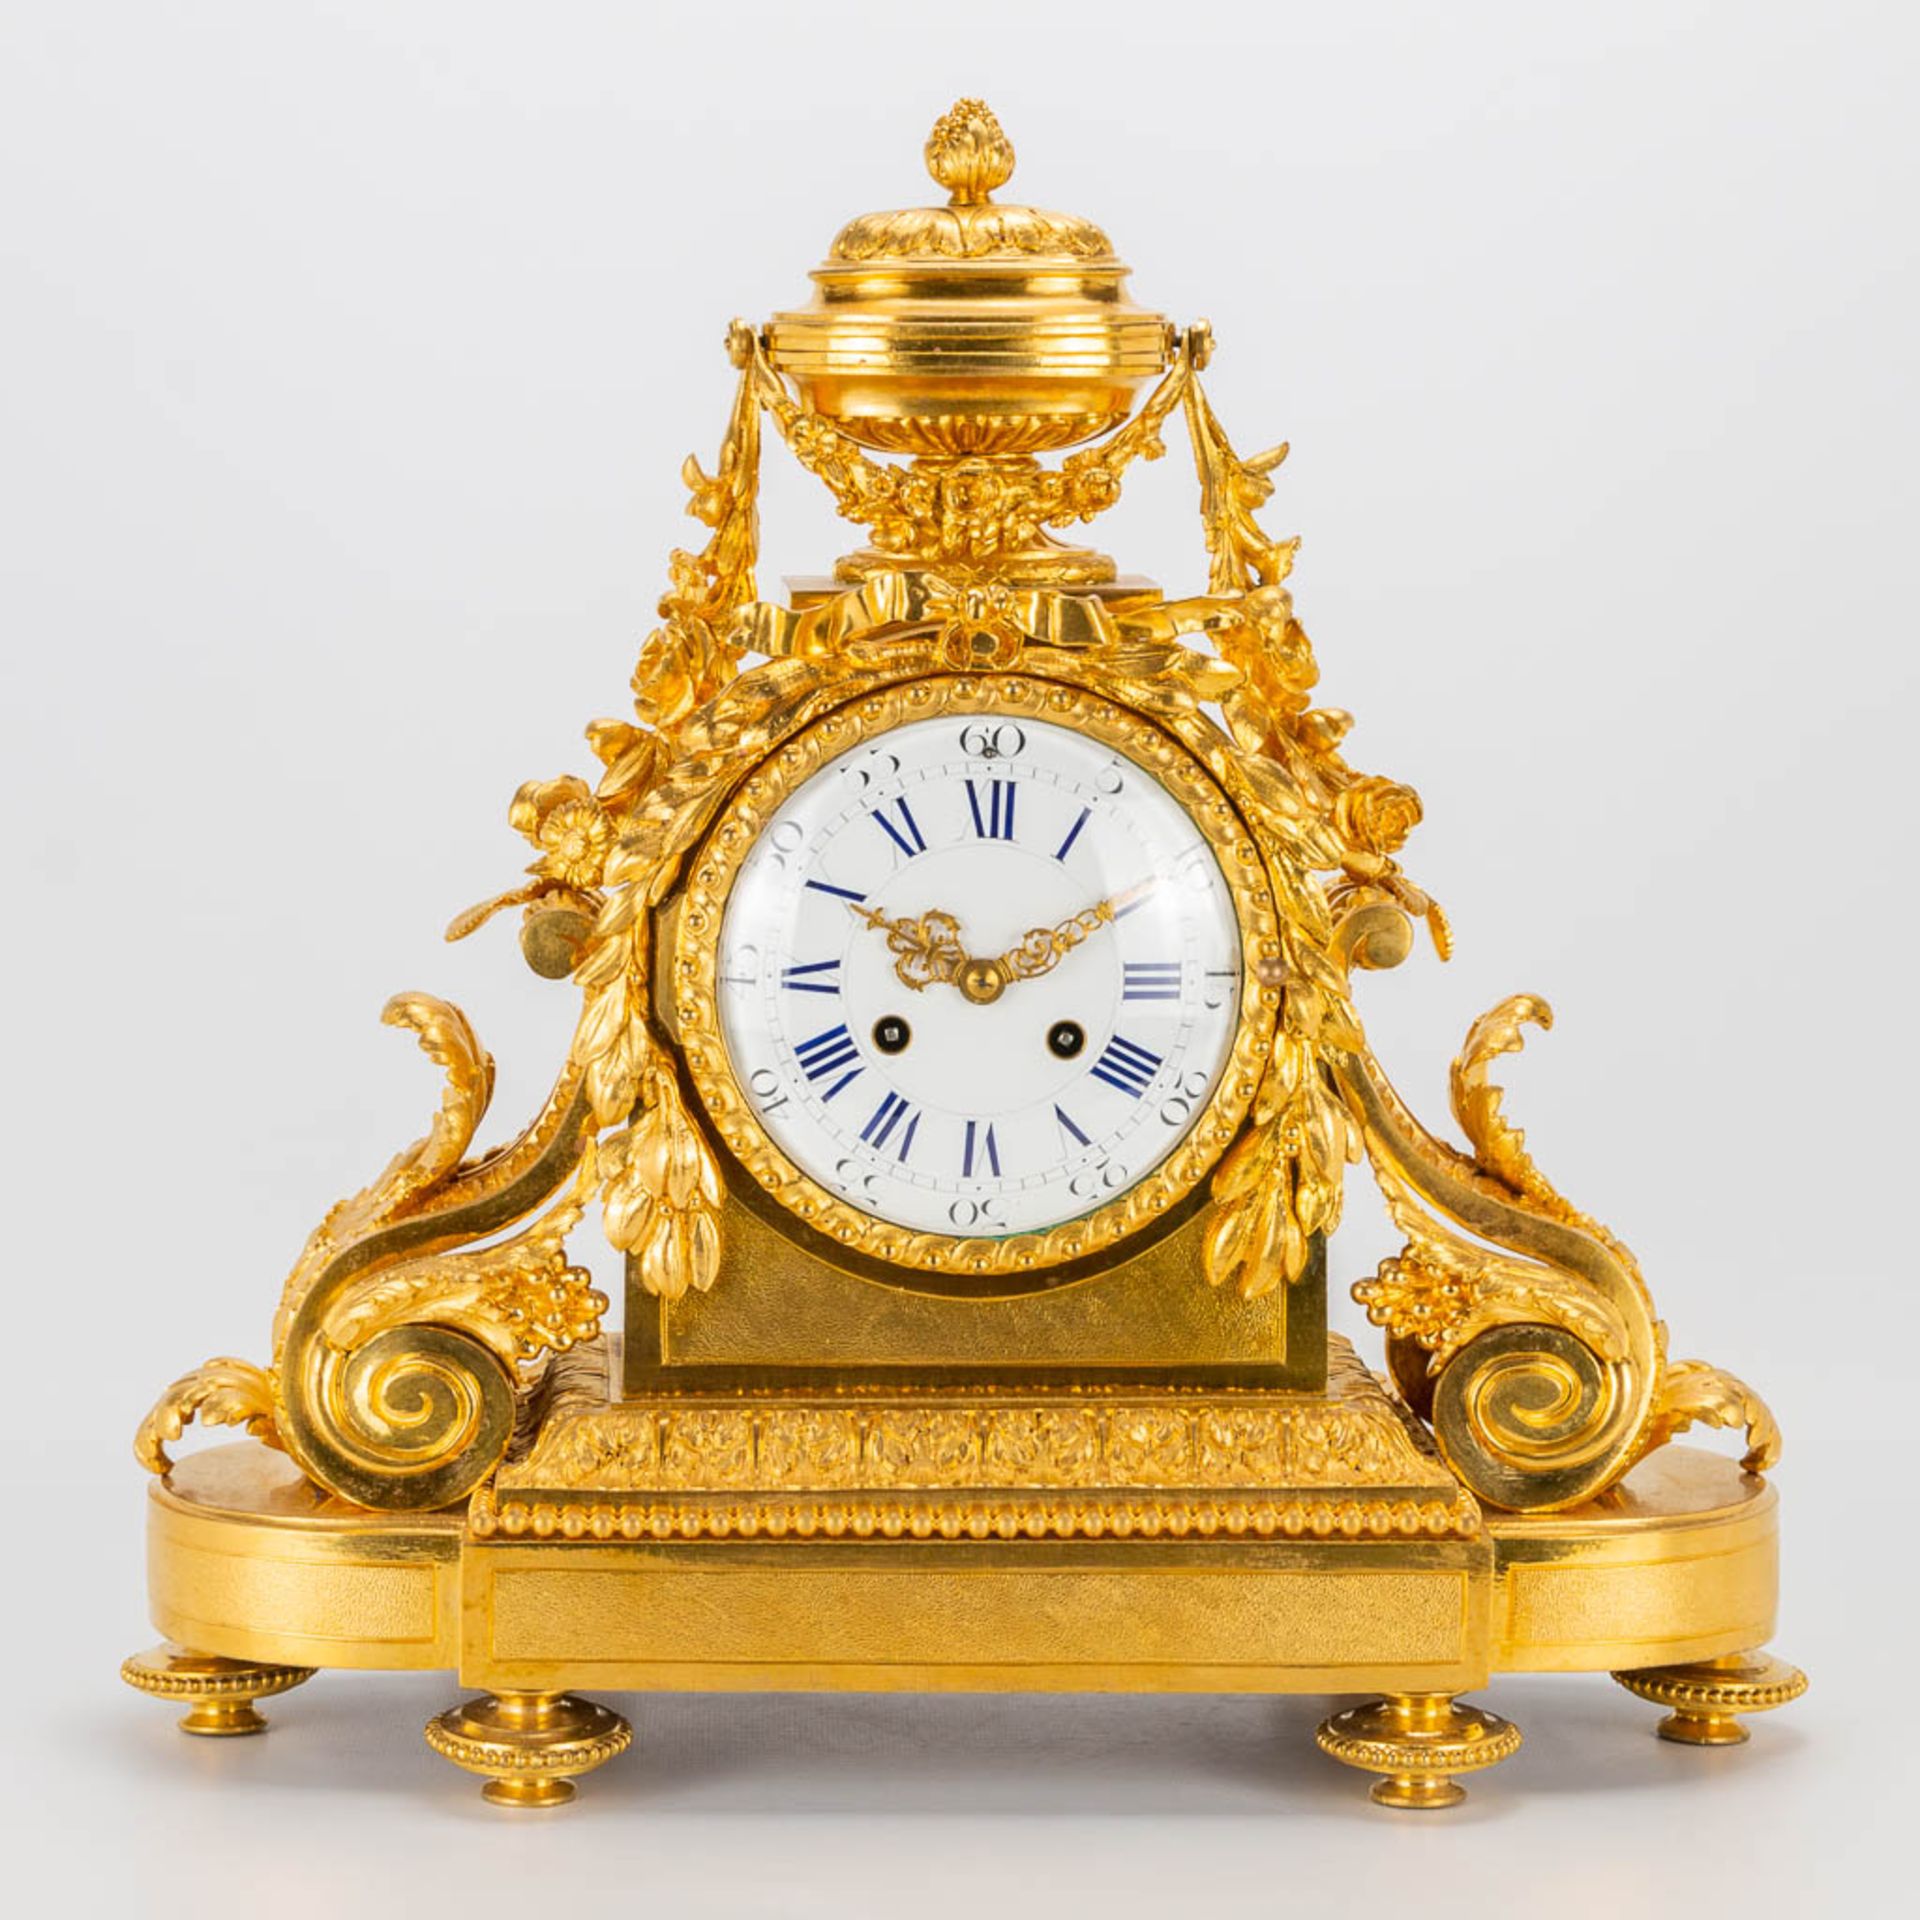 A bronze ormolu table clock made in Louis XVI style. 19th century. (15 x 41 x 42 cm) - Image 4 of 20